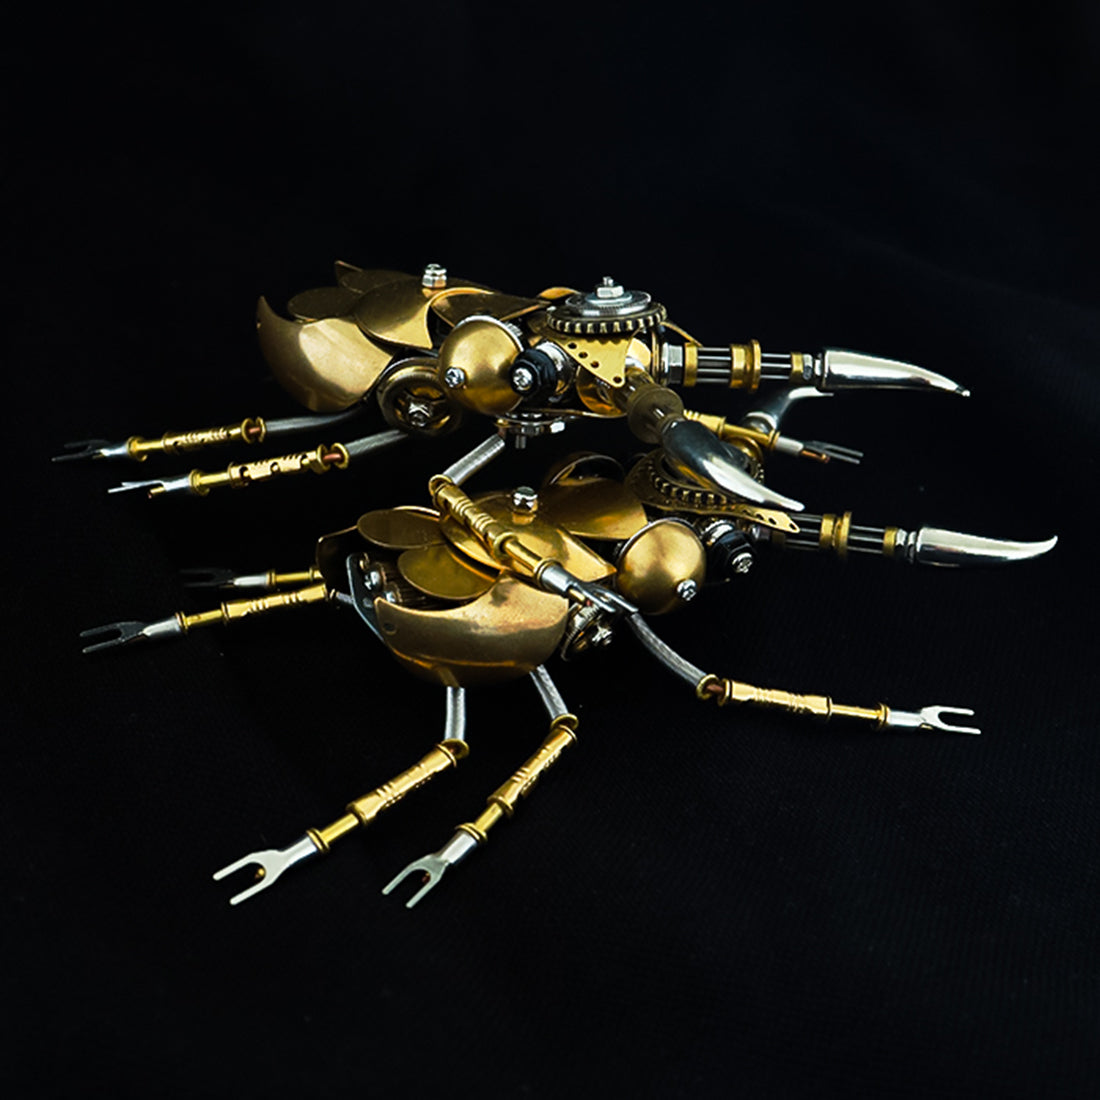 Brass Insect Metal Beetle Model Insect Handmade Crafts Collection